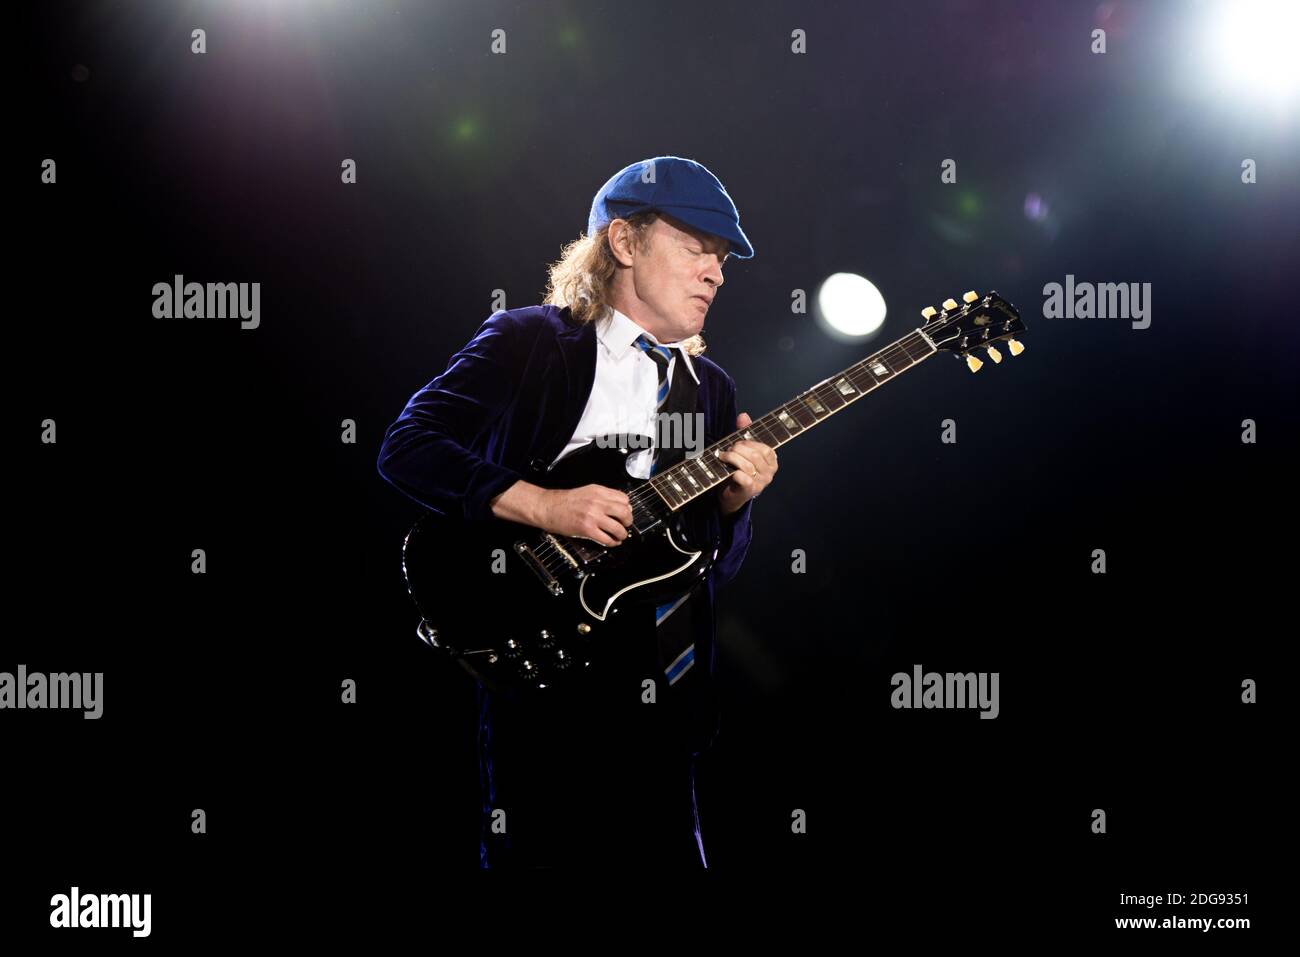 Angus Young, of the Australian rock band AC/DC, performing live for the “Rock or Bust World Tour” at the Autodromo Enzo e Dino Ferrari of Imola, Italy Stock Photo